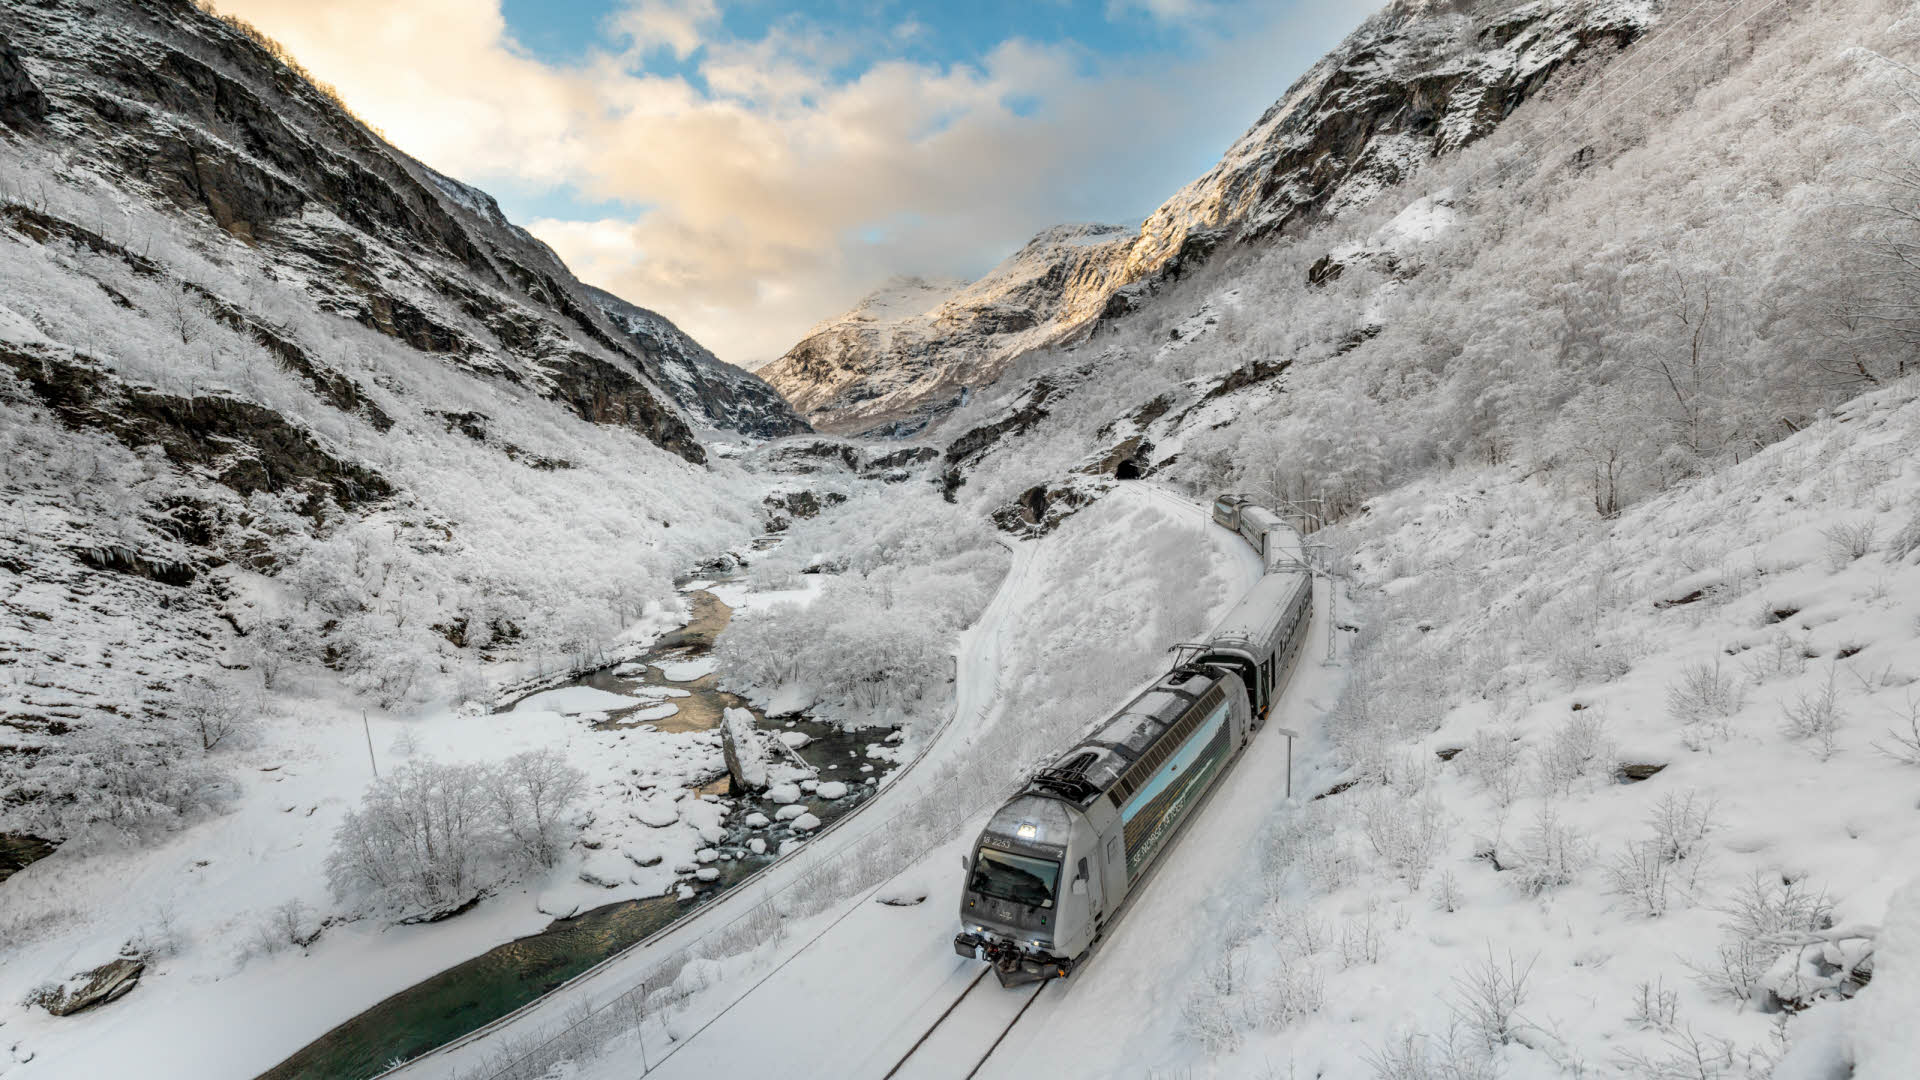 The Flåm Valley covered in snow and a train running next to the river. 